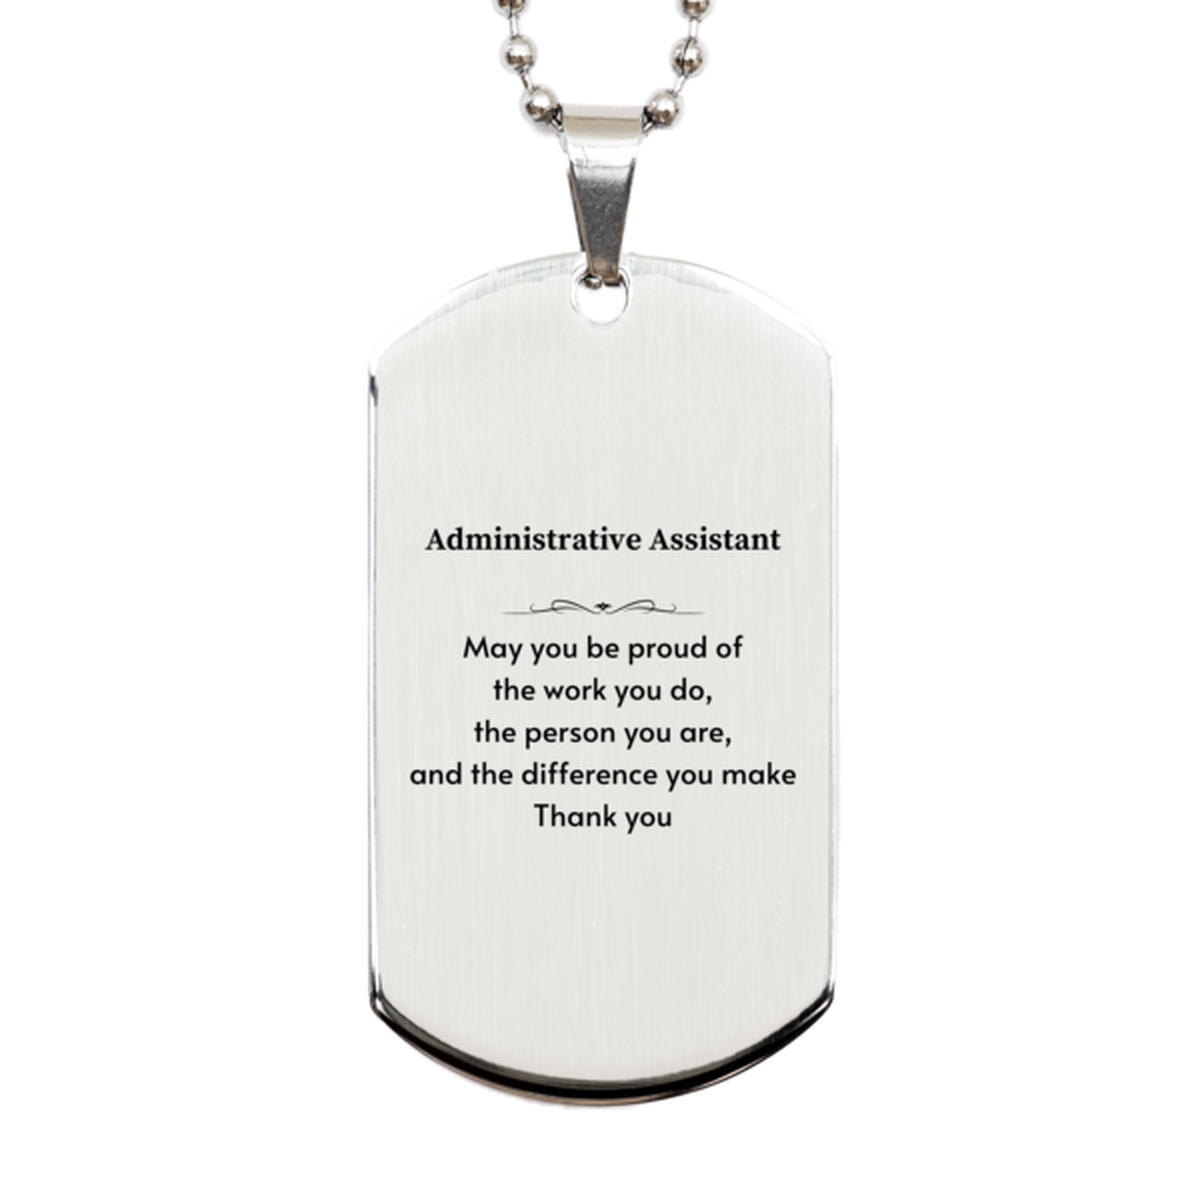 Heartwarming Silver Dog Tag Retirement Coworkers Gifts for Administrative Assistant, Administrative Assistant May You be proud of the work you do, the person you are Gifts for Boss Men Women Friends